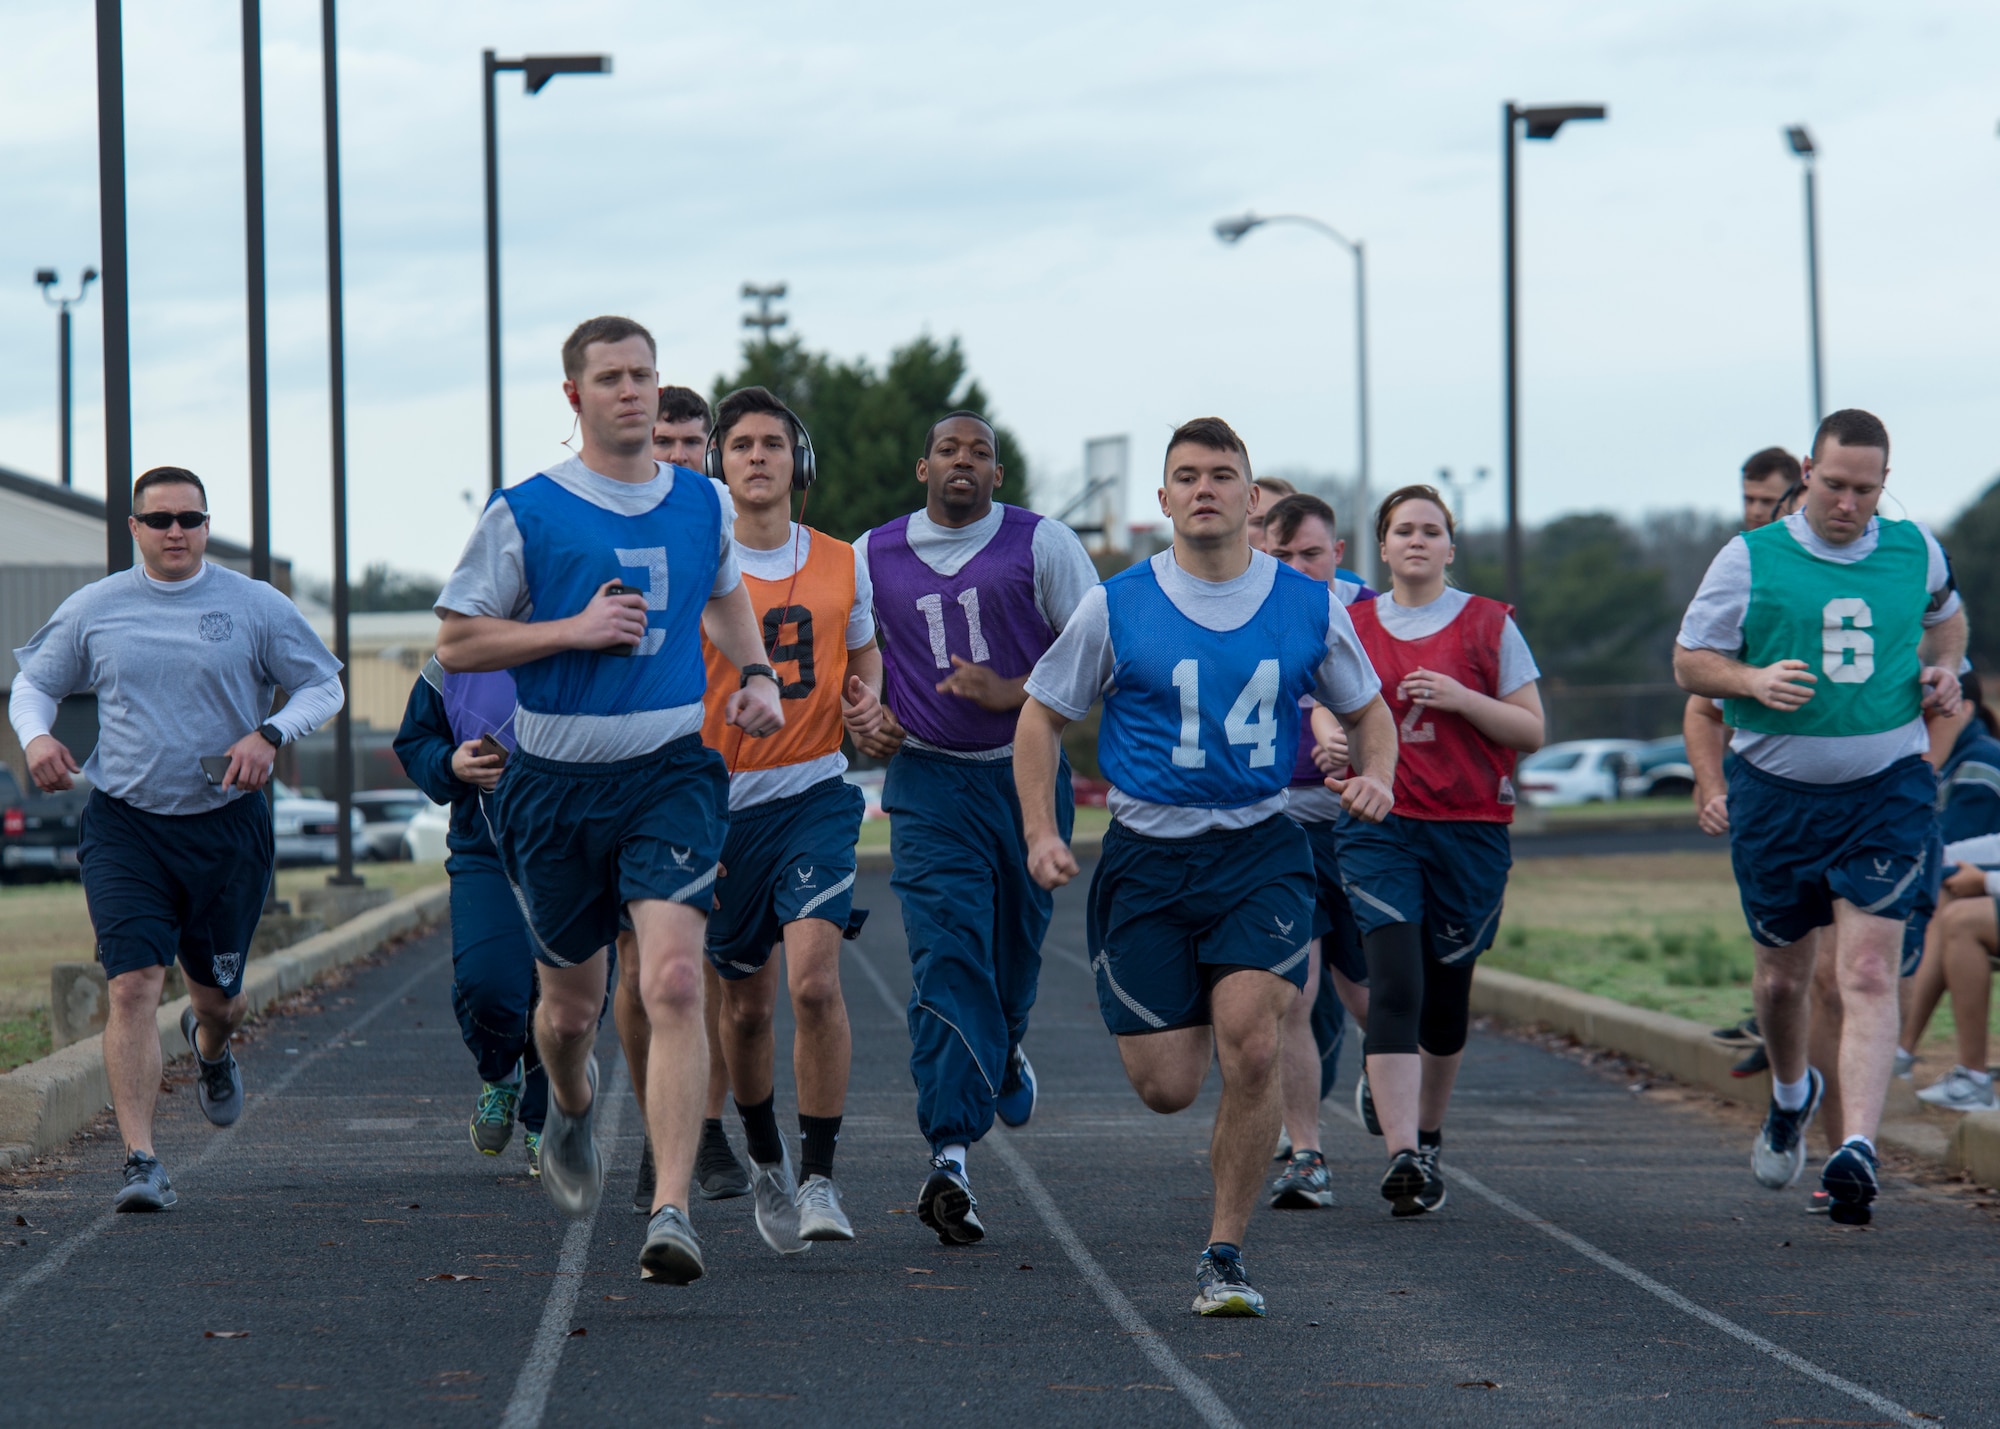 U.S. Airmen begin a timed 1.5 mile run at the track at Shaw Air Force Base, S.C., Feb. 12, 2018.